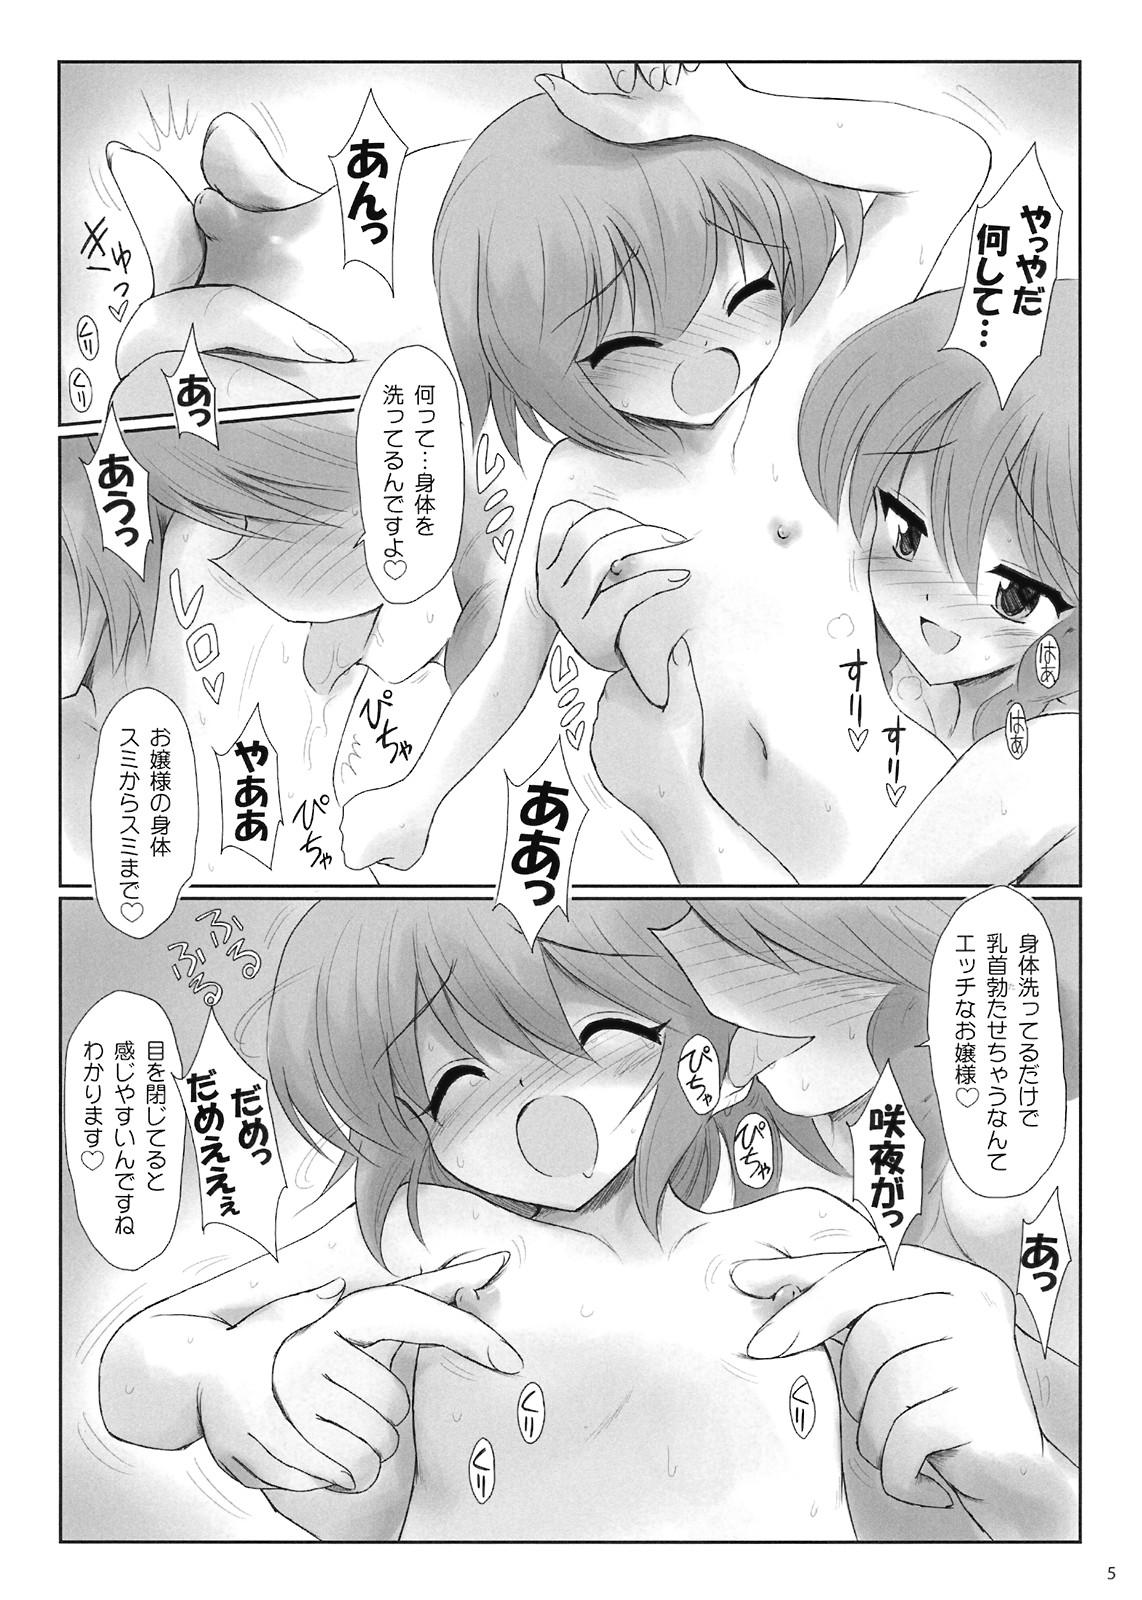 Dildo Fucking コピー本 - Touhou project Blackmail - Page 5